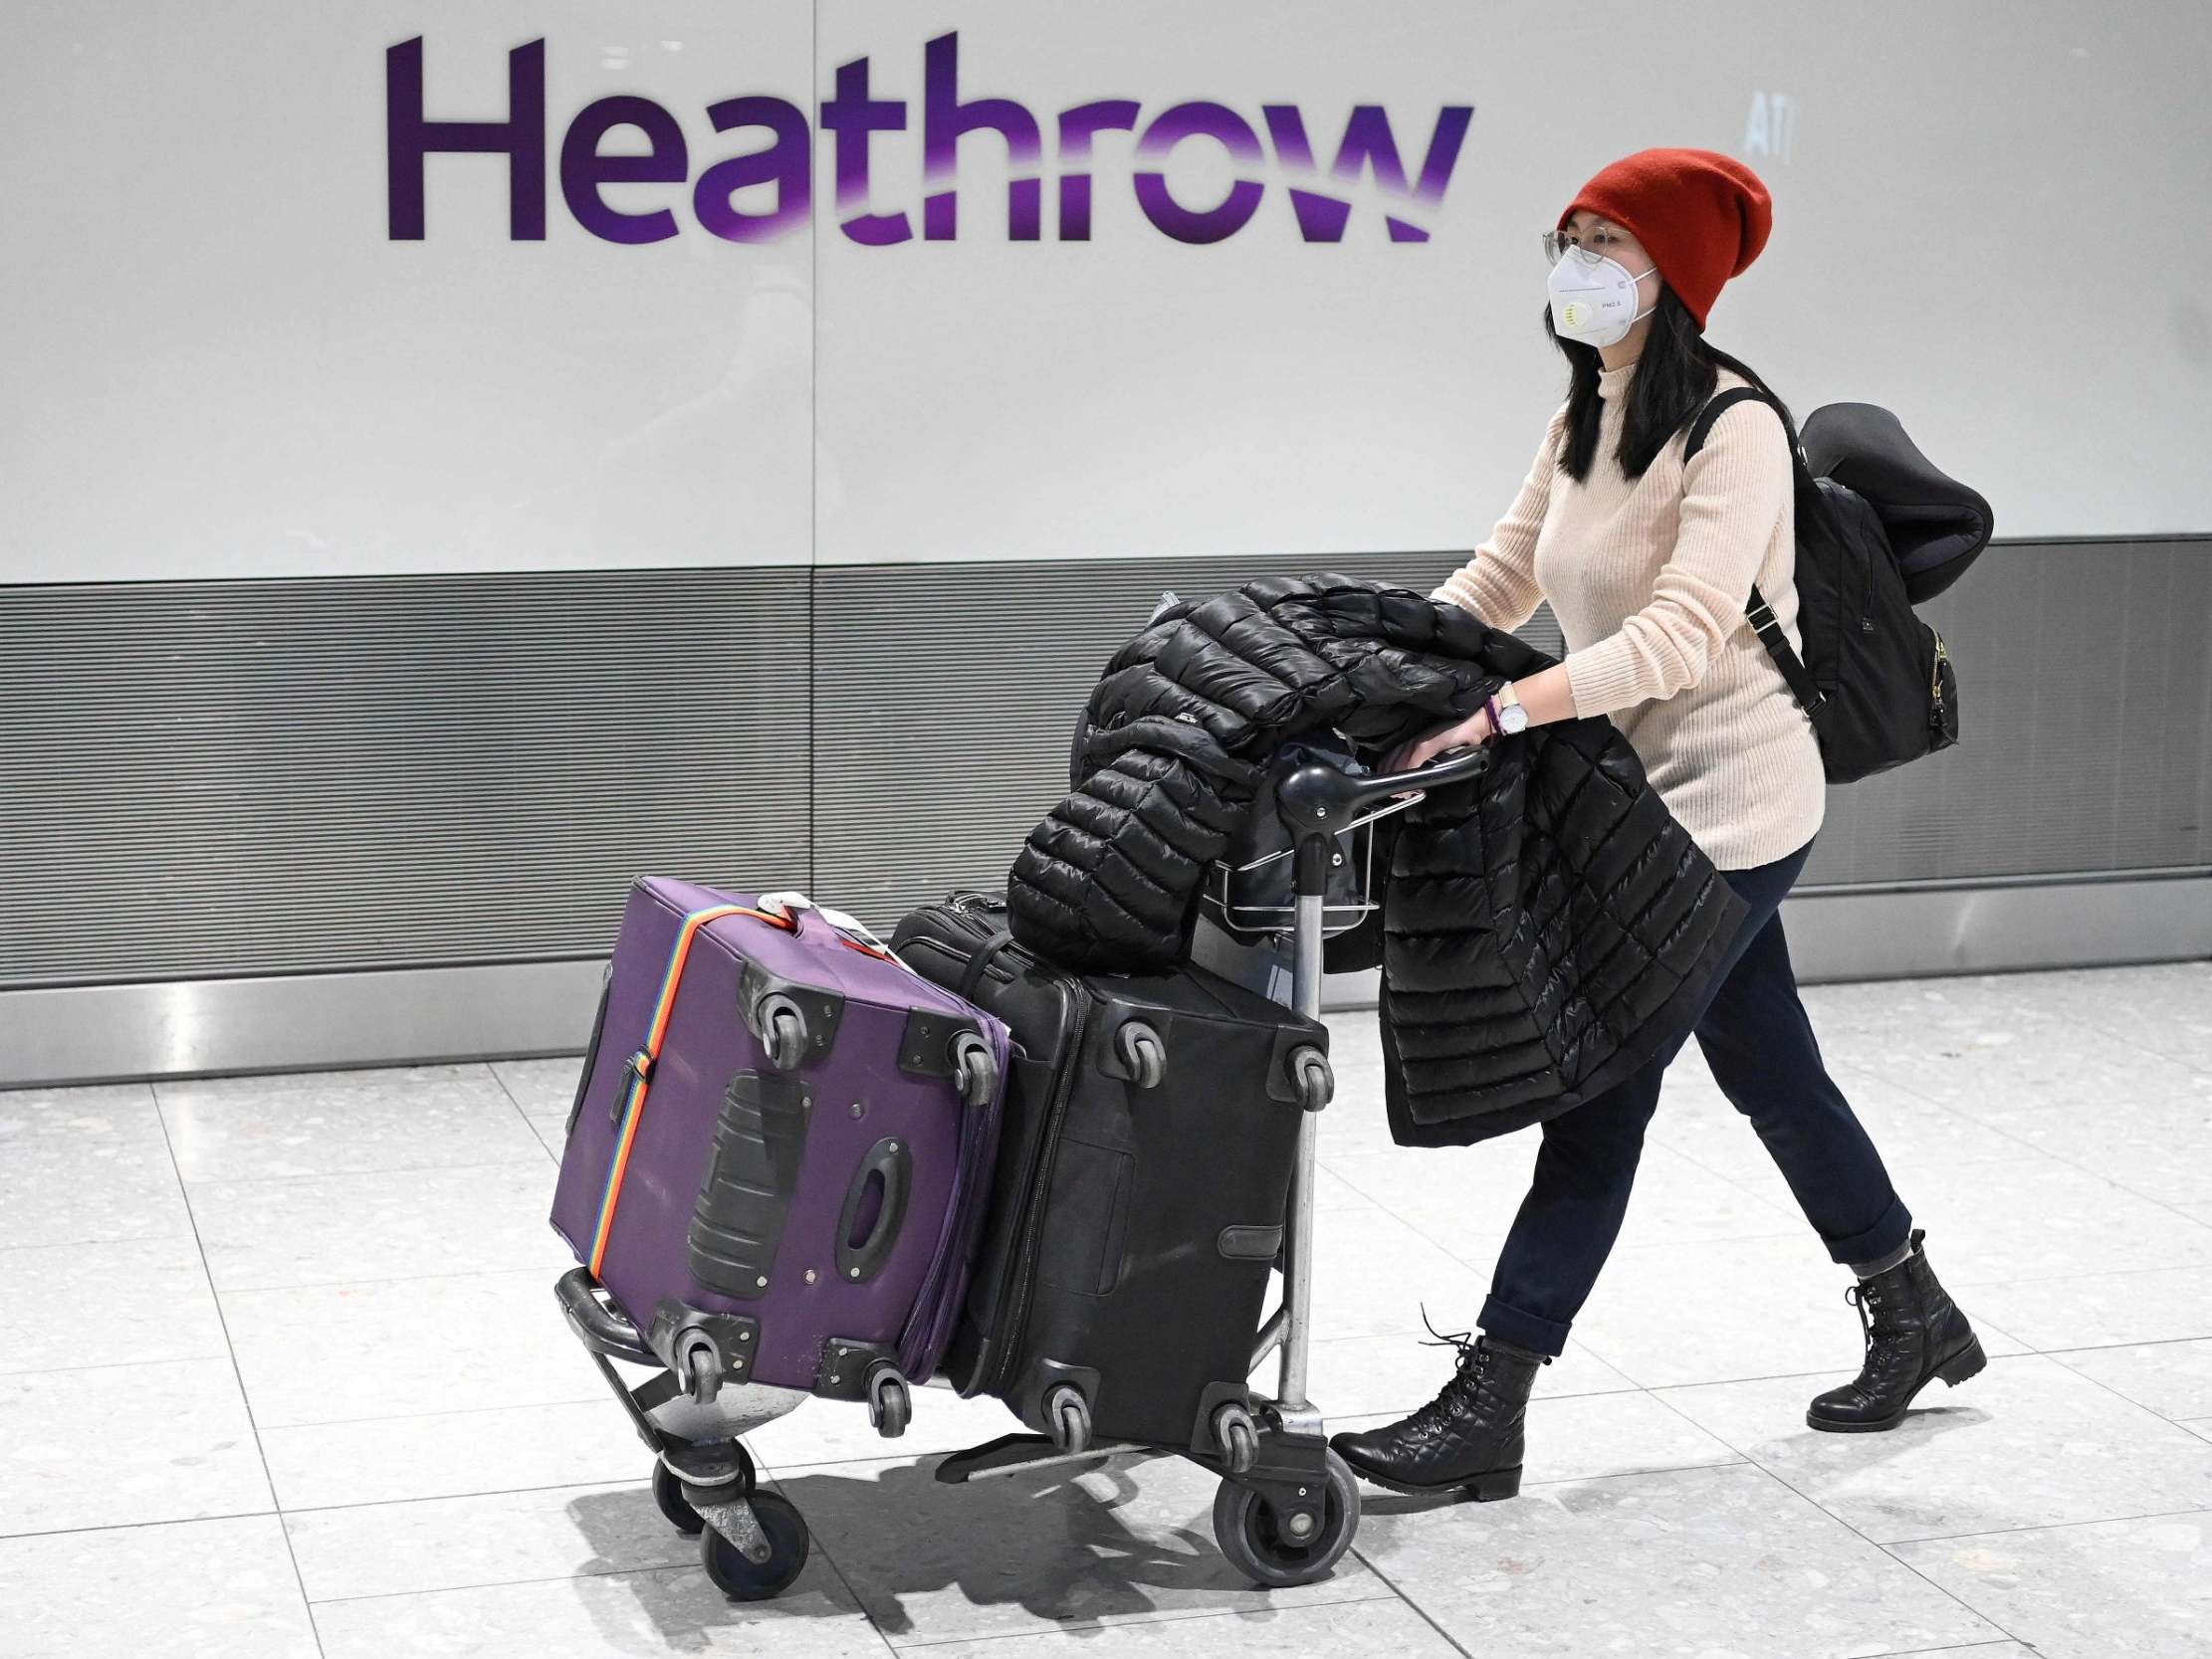 A passenger wearing a face mask arrives at Heathrow Airport